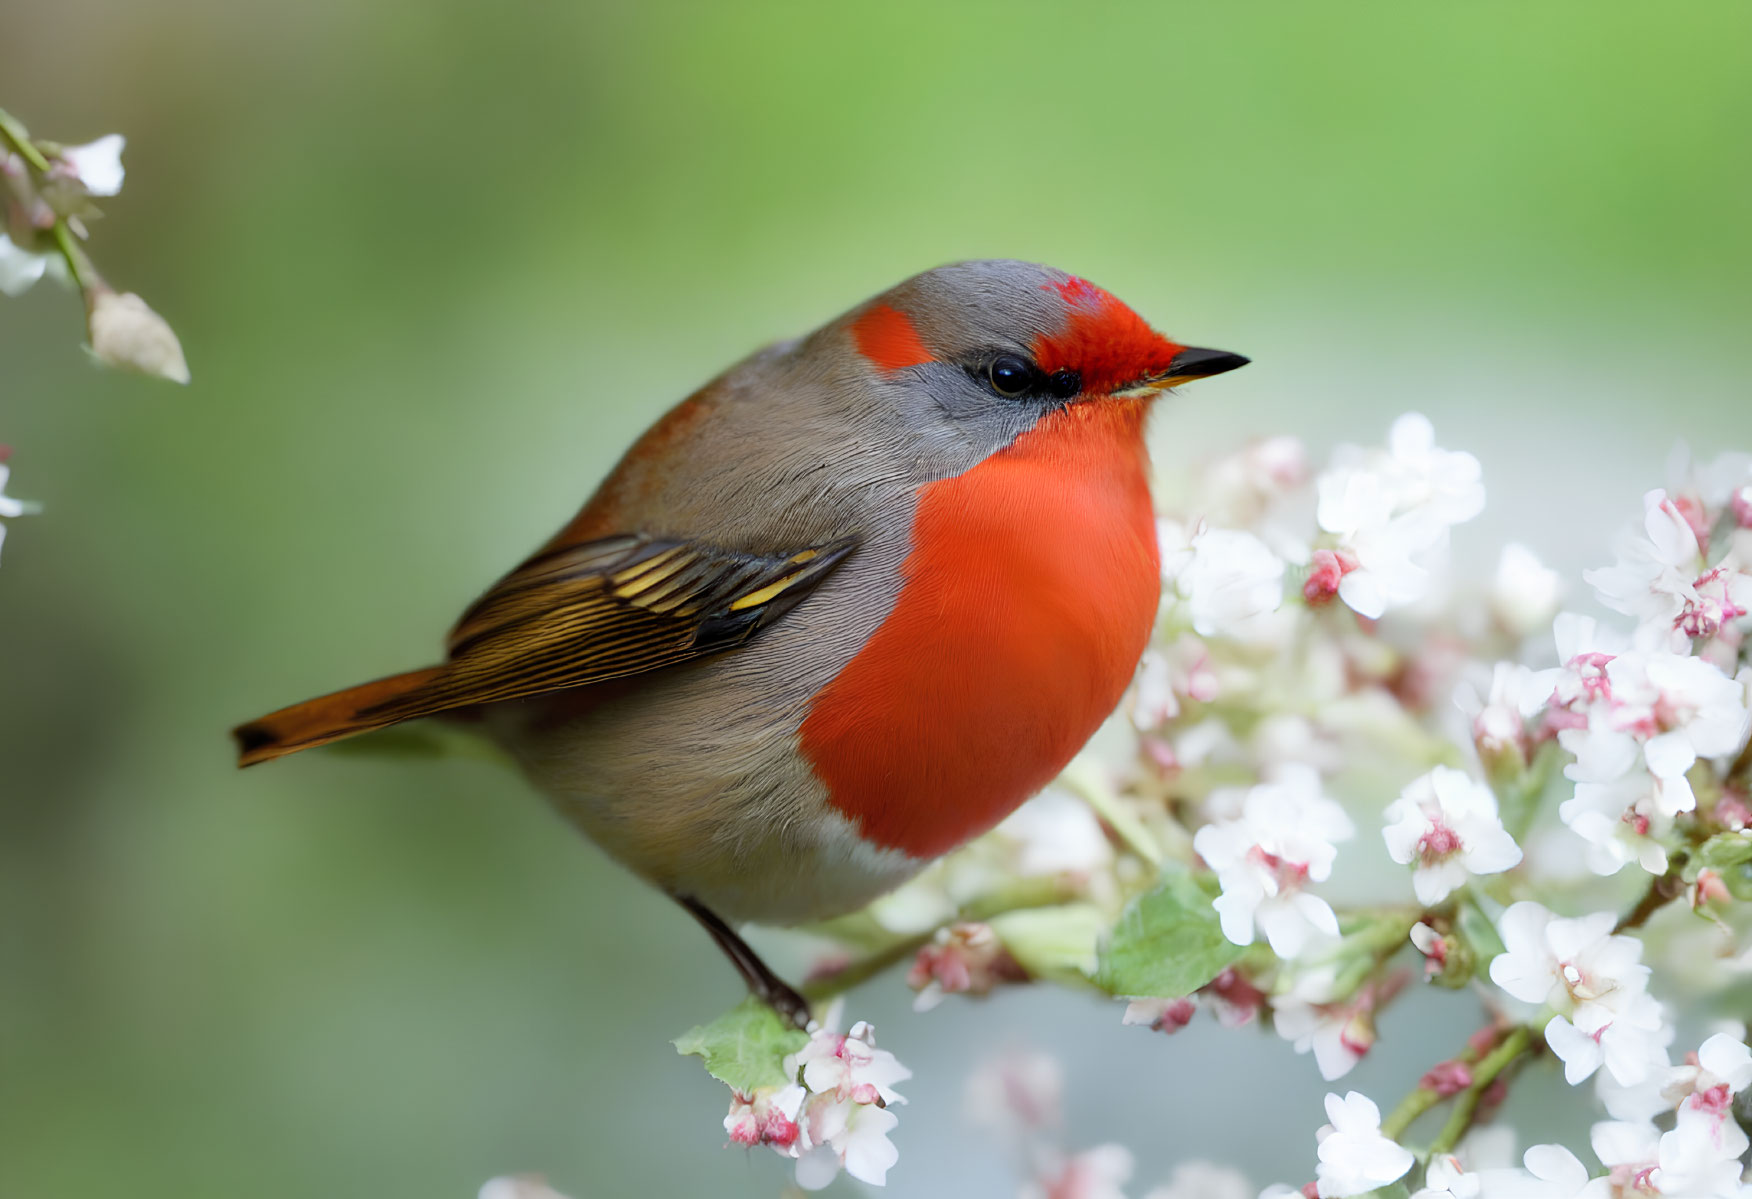 Vivid red and gray bird on branch with white flowers in soft green backdrop